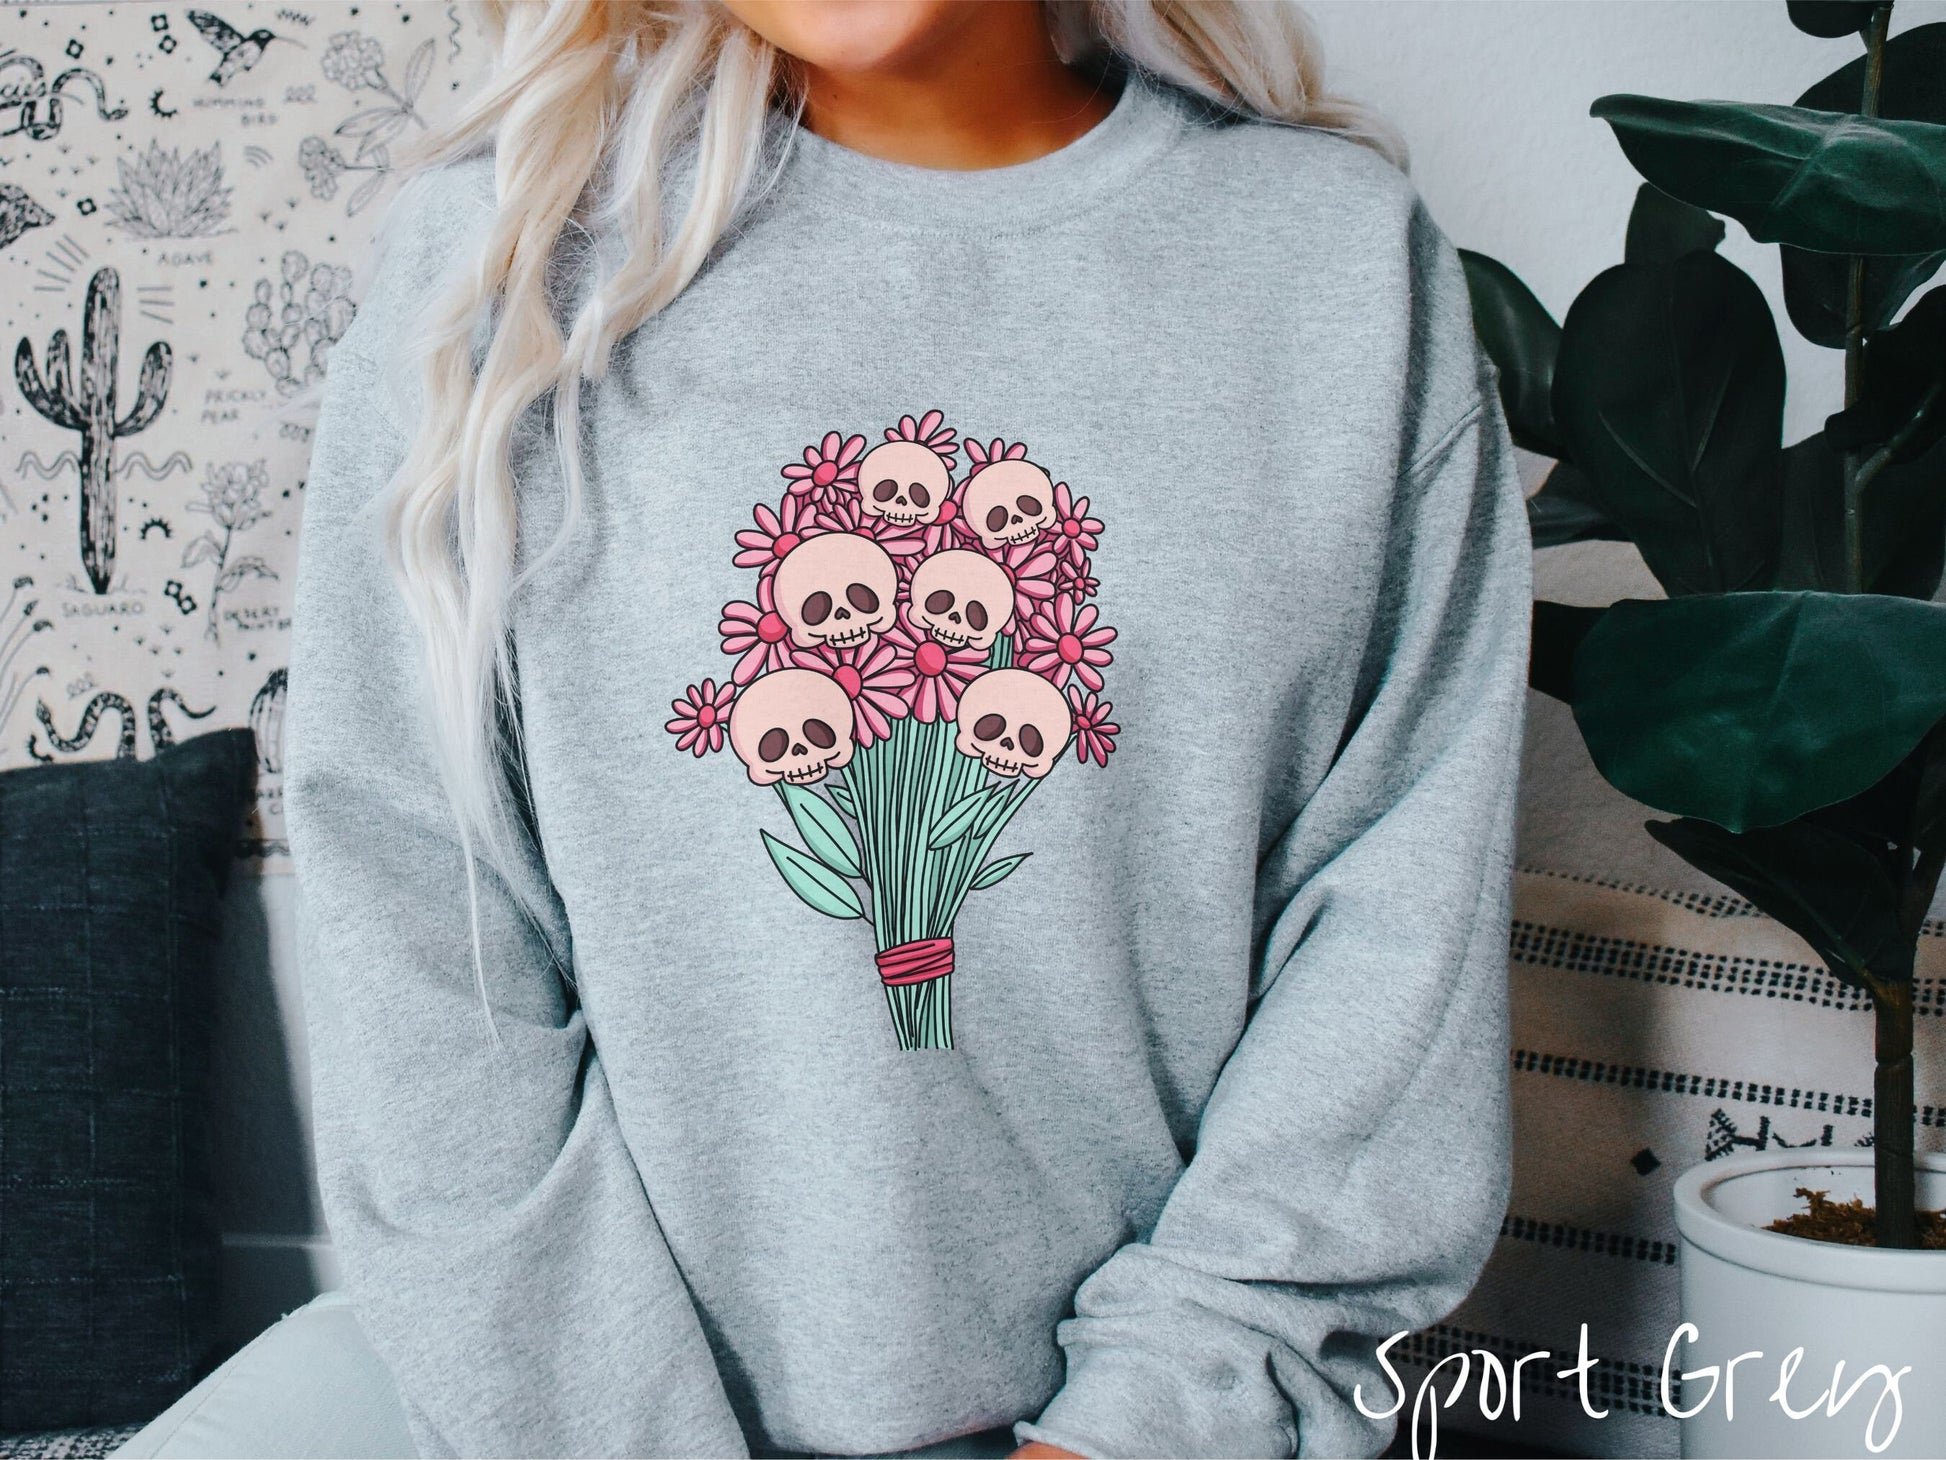 A woman wearing a cute sport grey colored sweatshirt with a spooky flower bouquet with skull heads as the flowers among pink colored flowers.